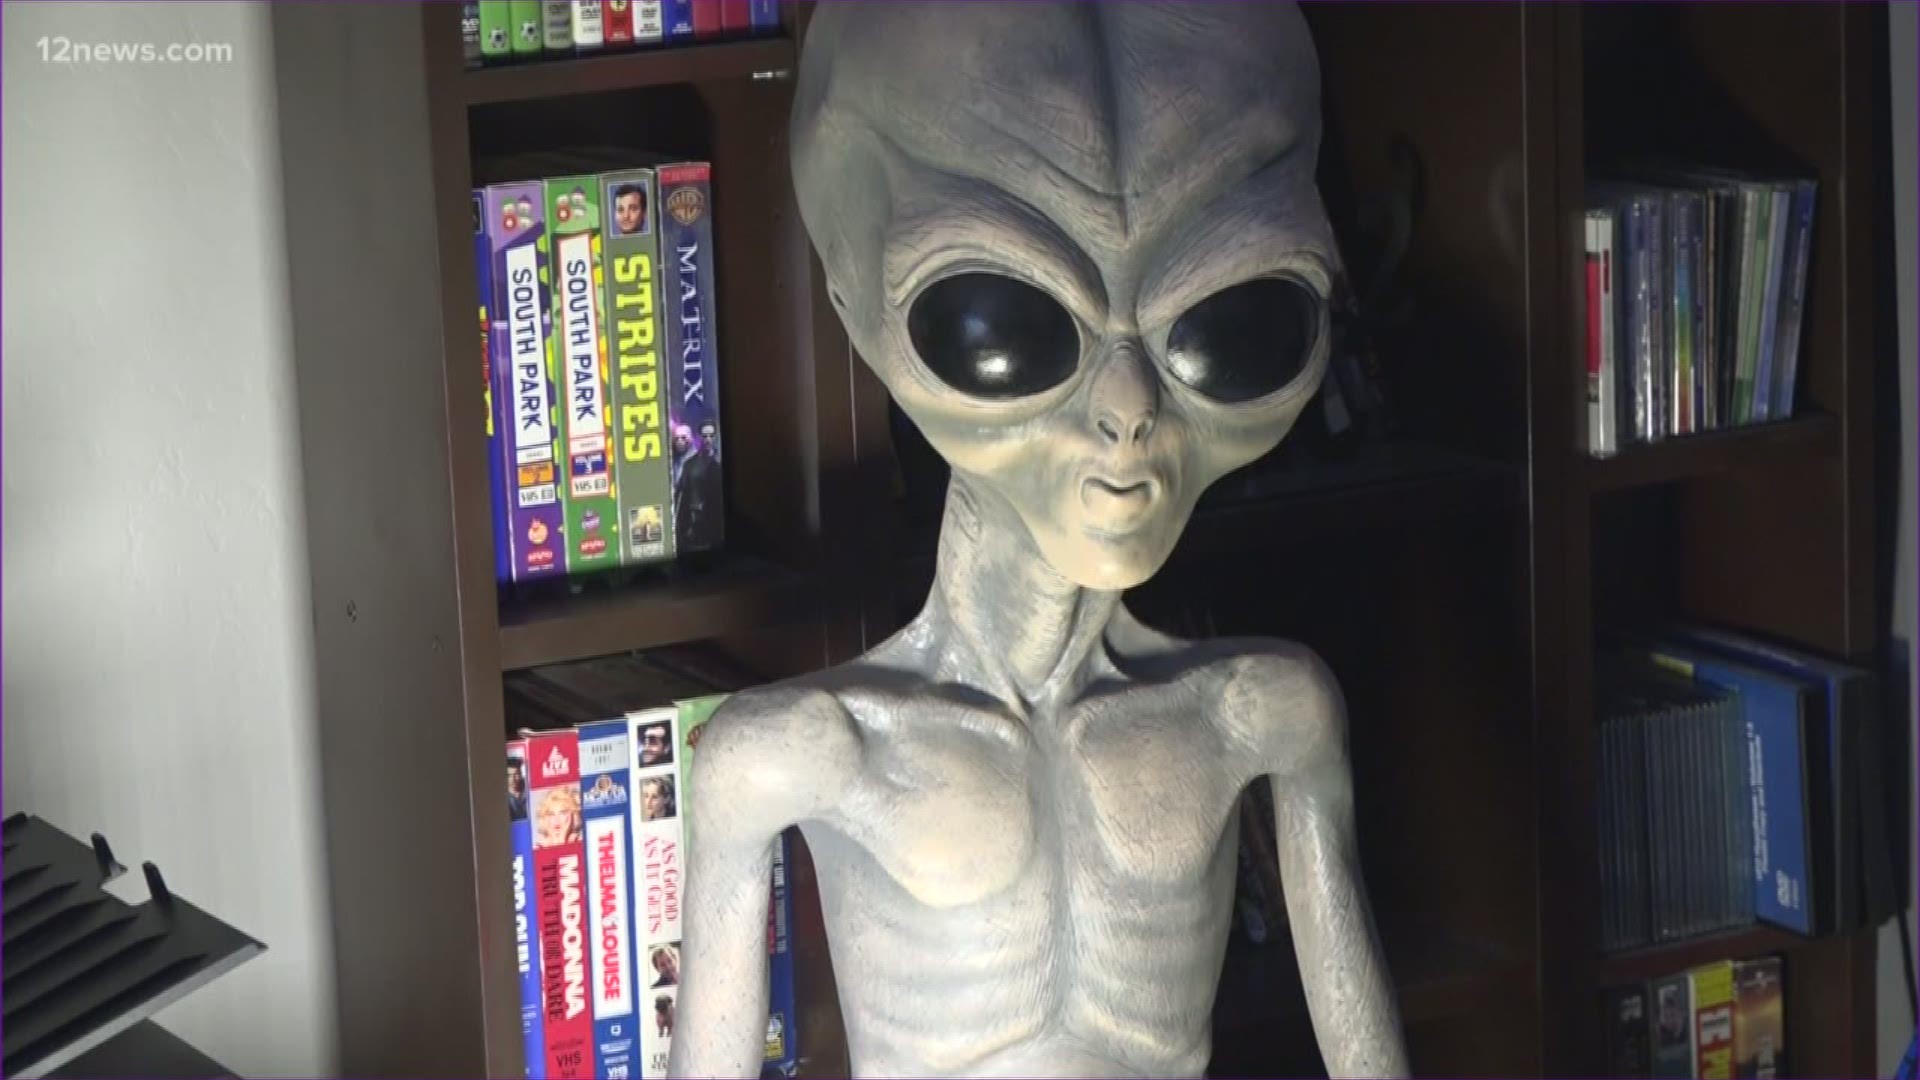 It's a bird! It's a plane! It's an unidentified flying object! We celebrate the unknown on World UFO Day by asking some Arizonans if they believe we are being watched by the unknown.